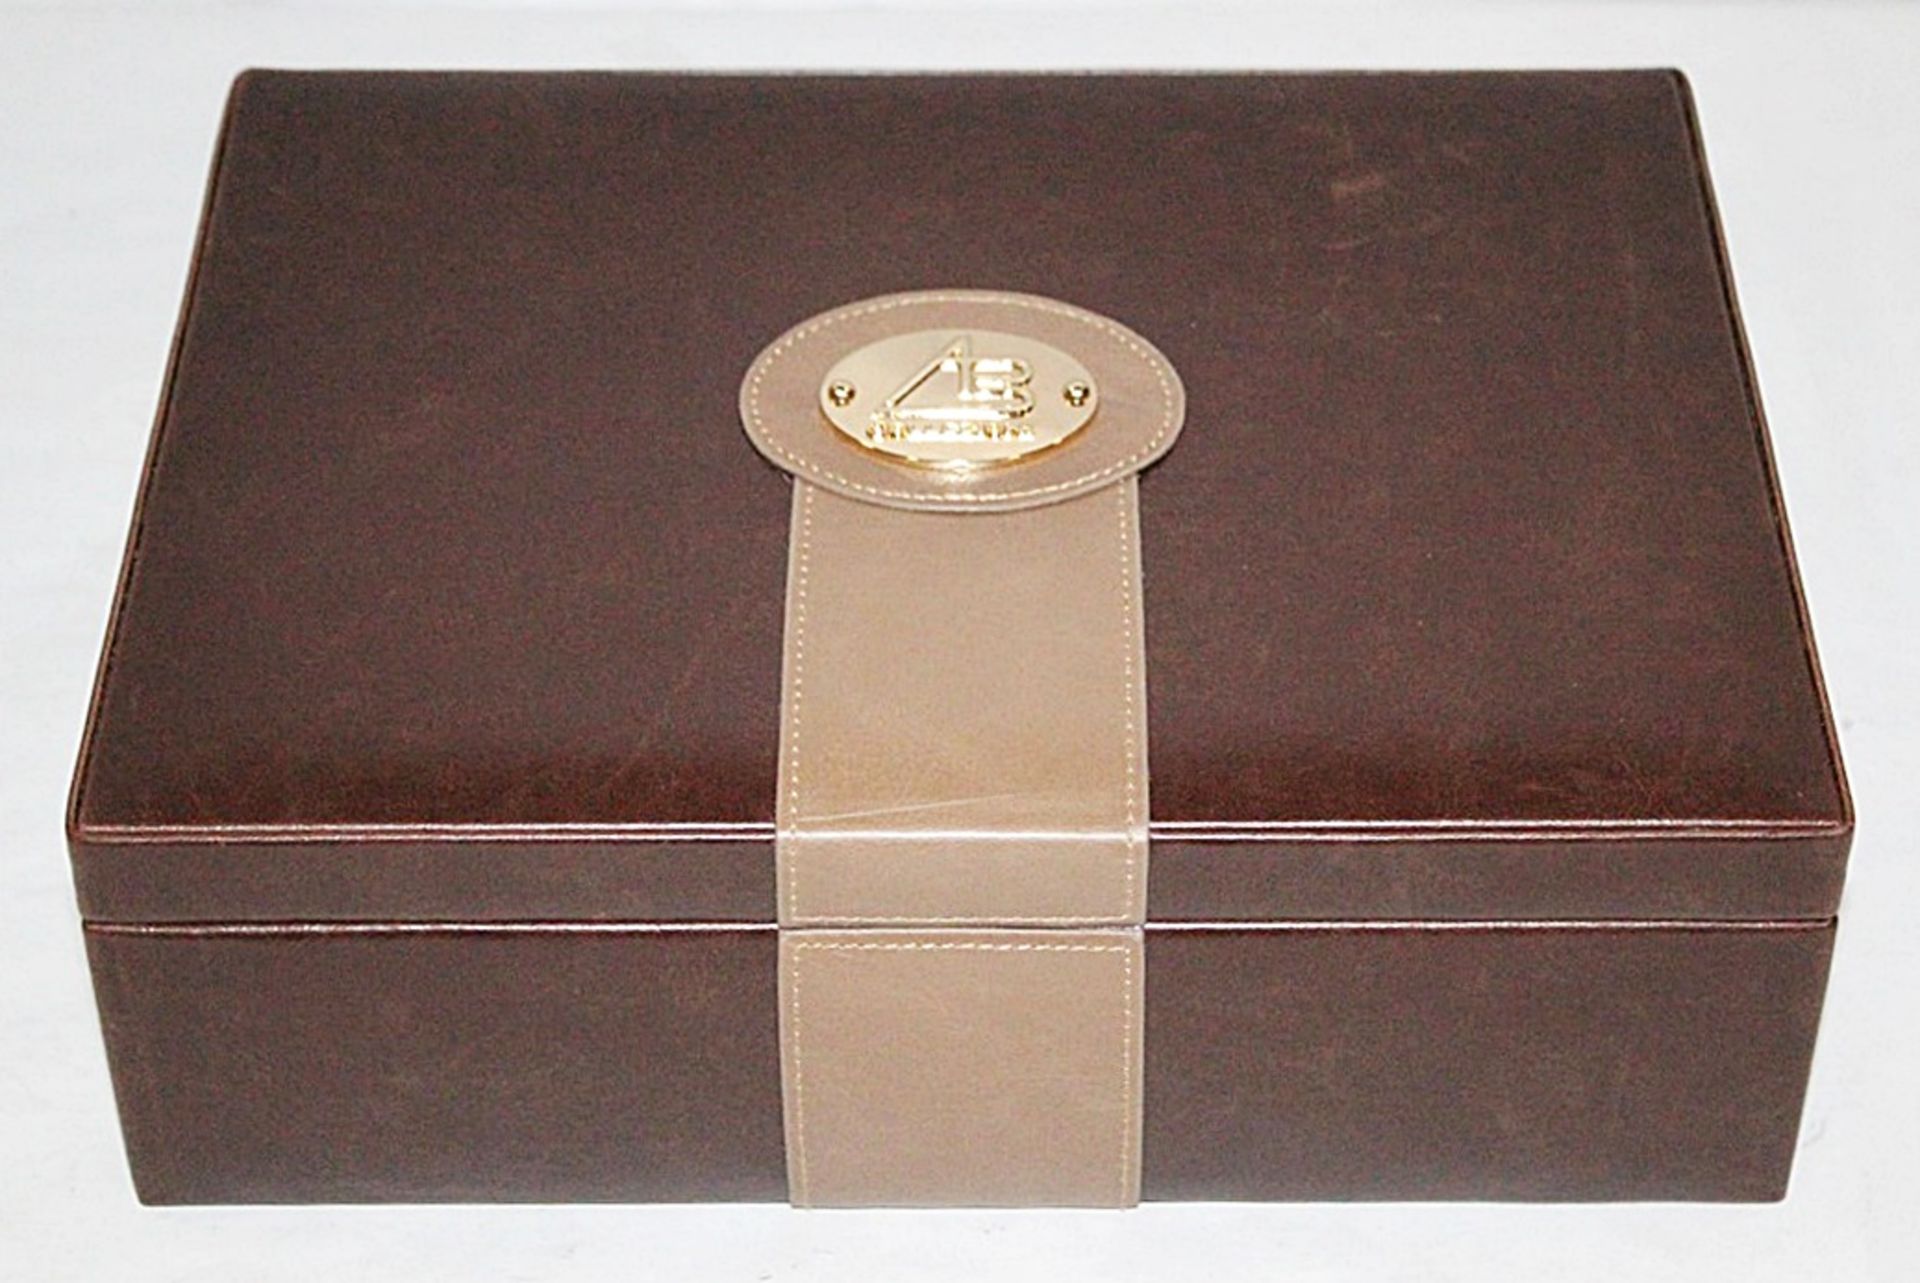 1 x "AB Collezioni" Italian Luxury Brown Leather Watch Case (34040) - Ref LT129 - Dimensions: - Image 2 of 3